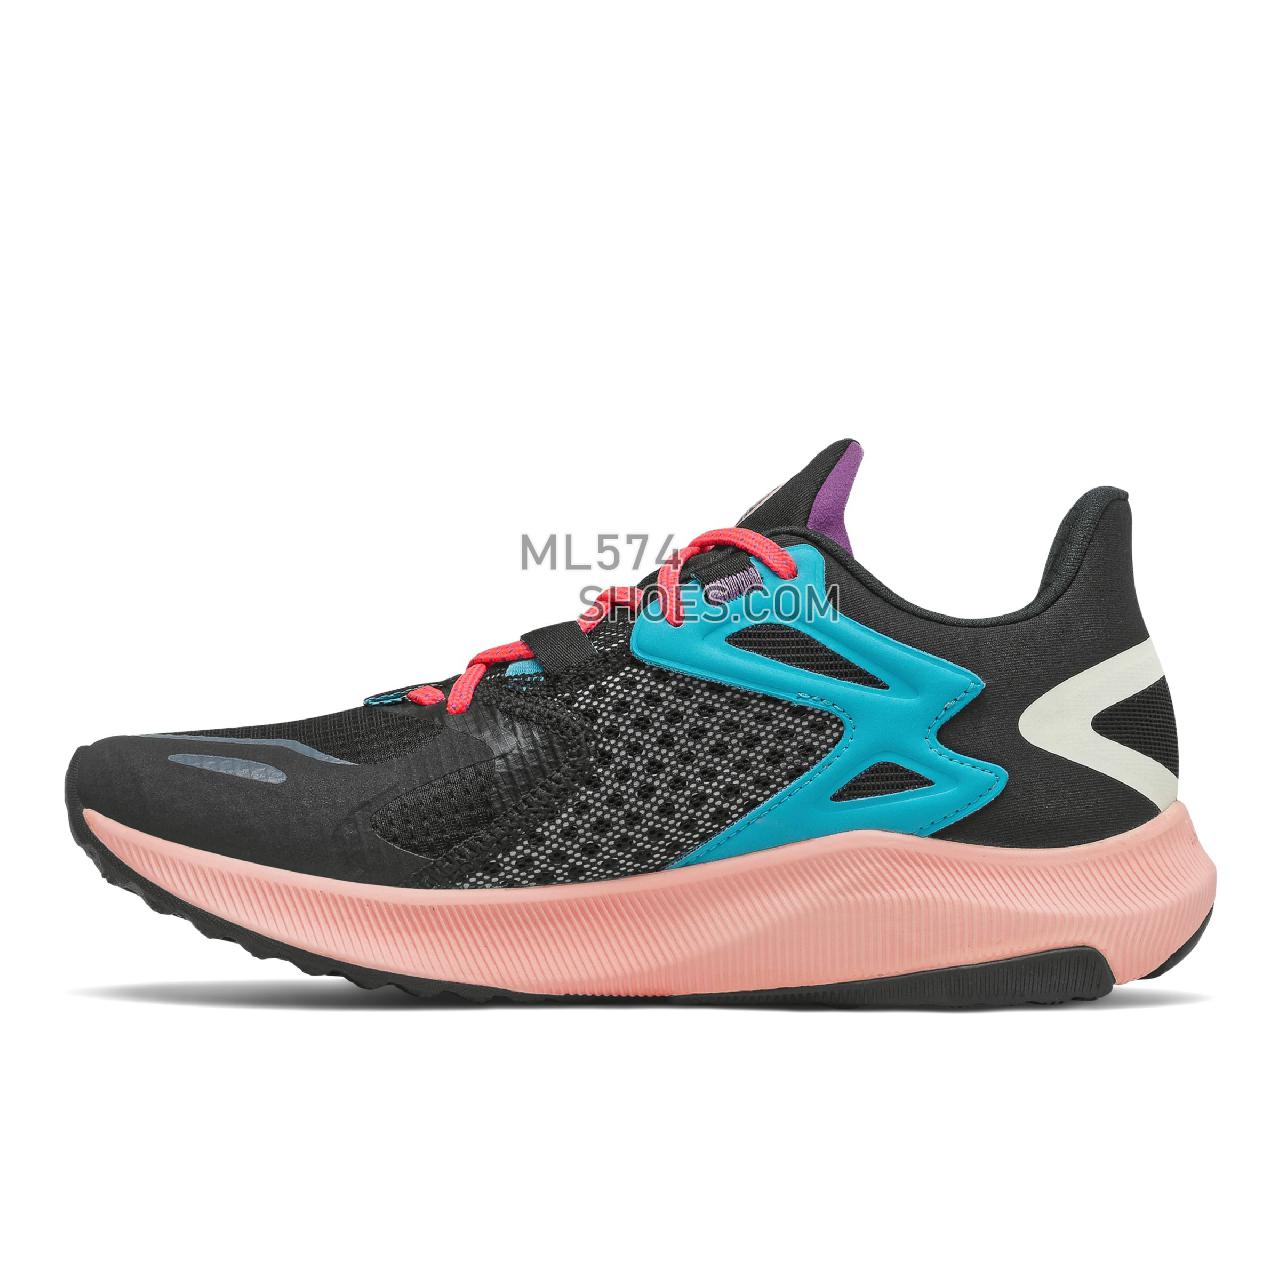 New Balance FuelCell Propel RMX - Women's Fuelcell Sleek And LightWeight - Black with Vivid Coral and Cloud Pink - WPRMXCM